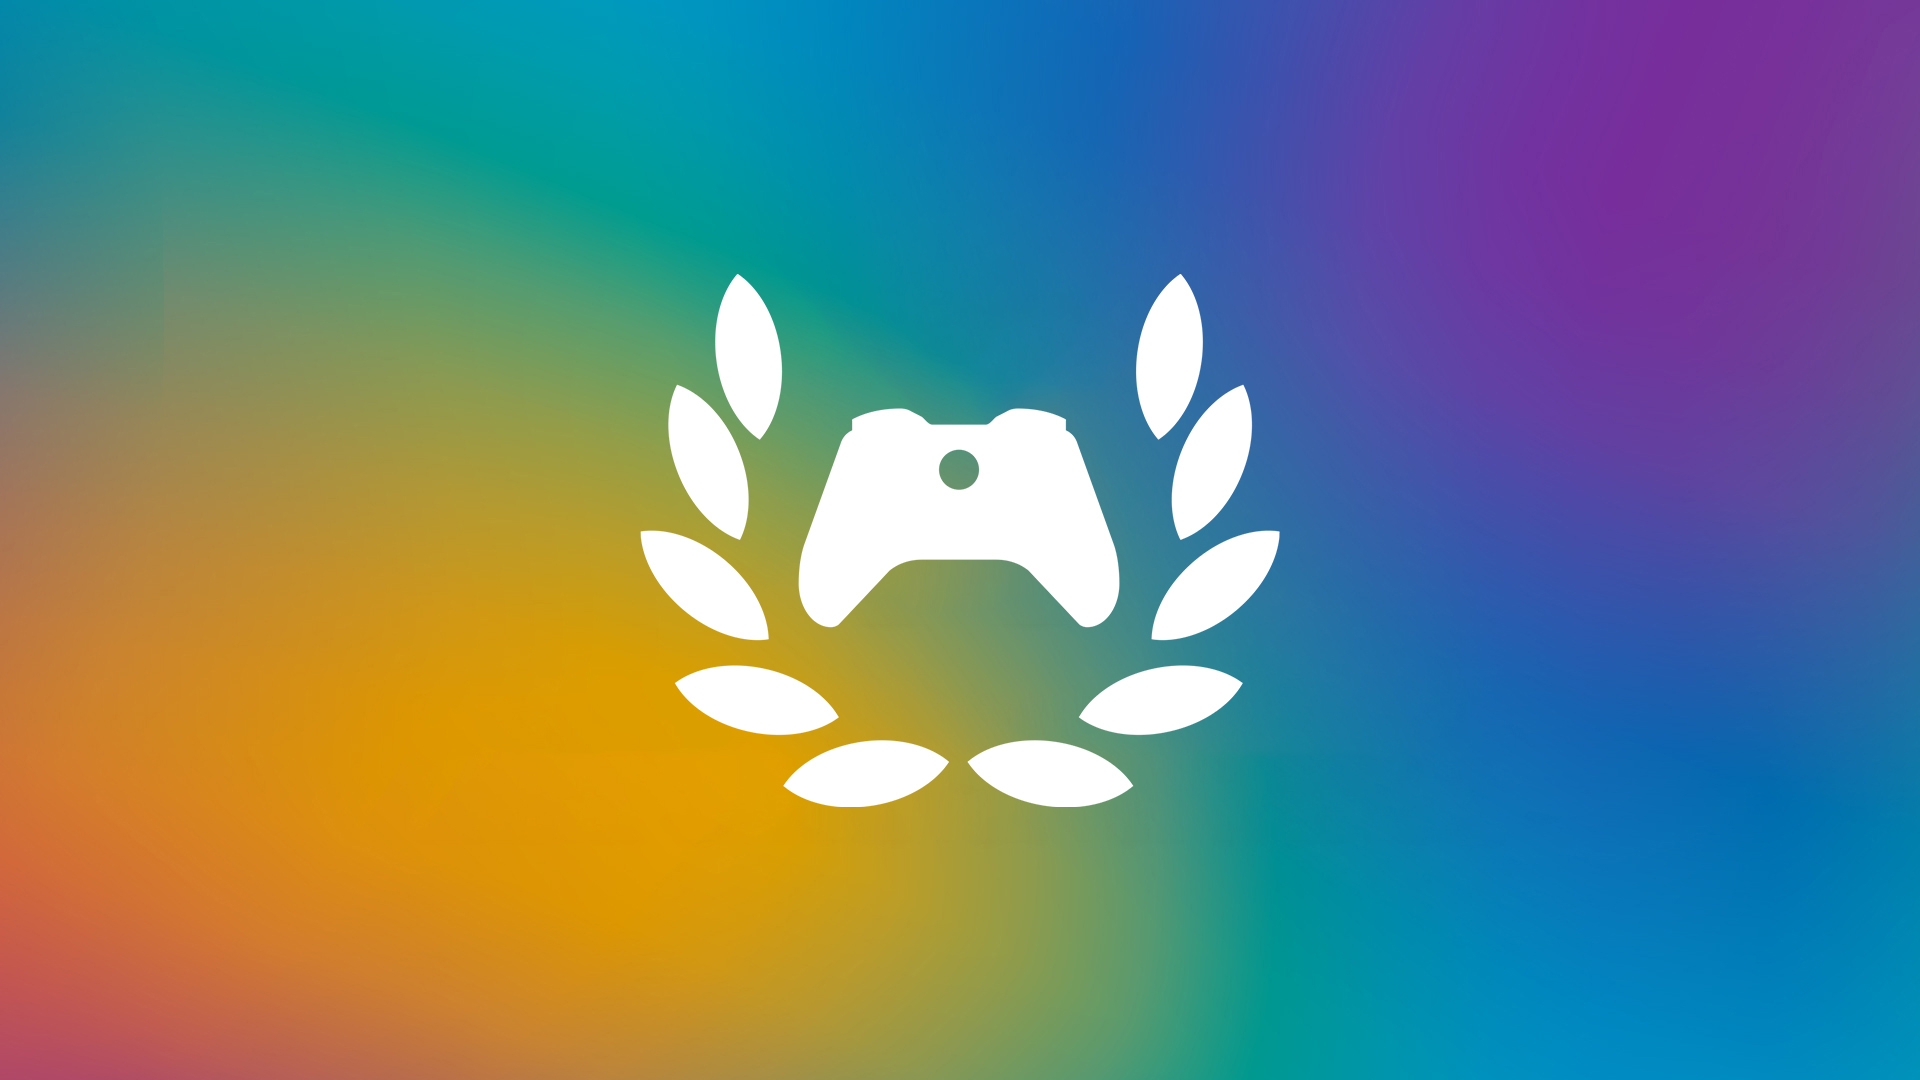 White Xbox controller icon with white laurels surrounding it layered over a blurred rainbow background.